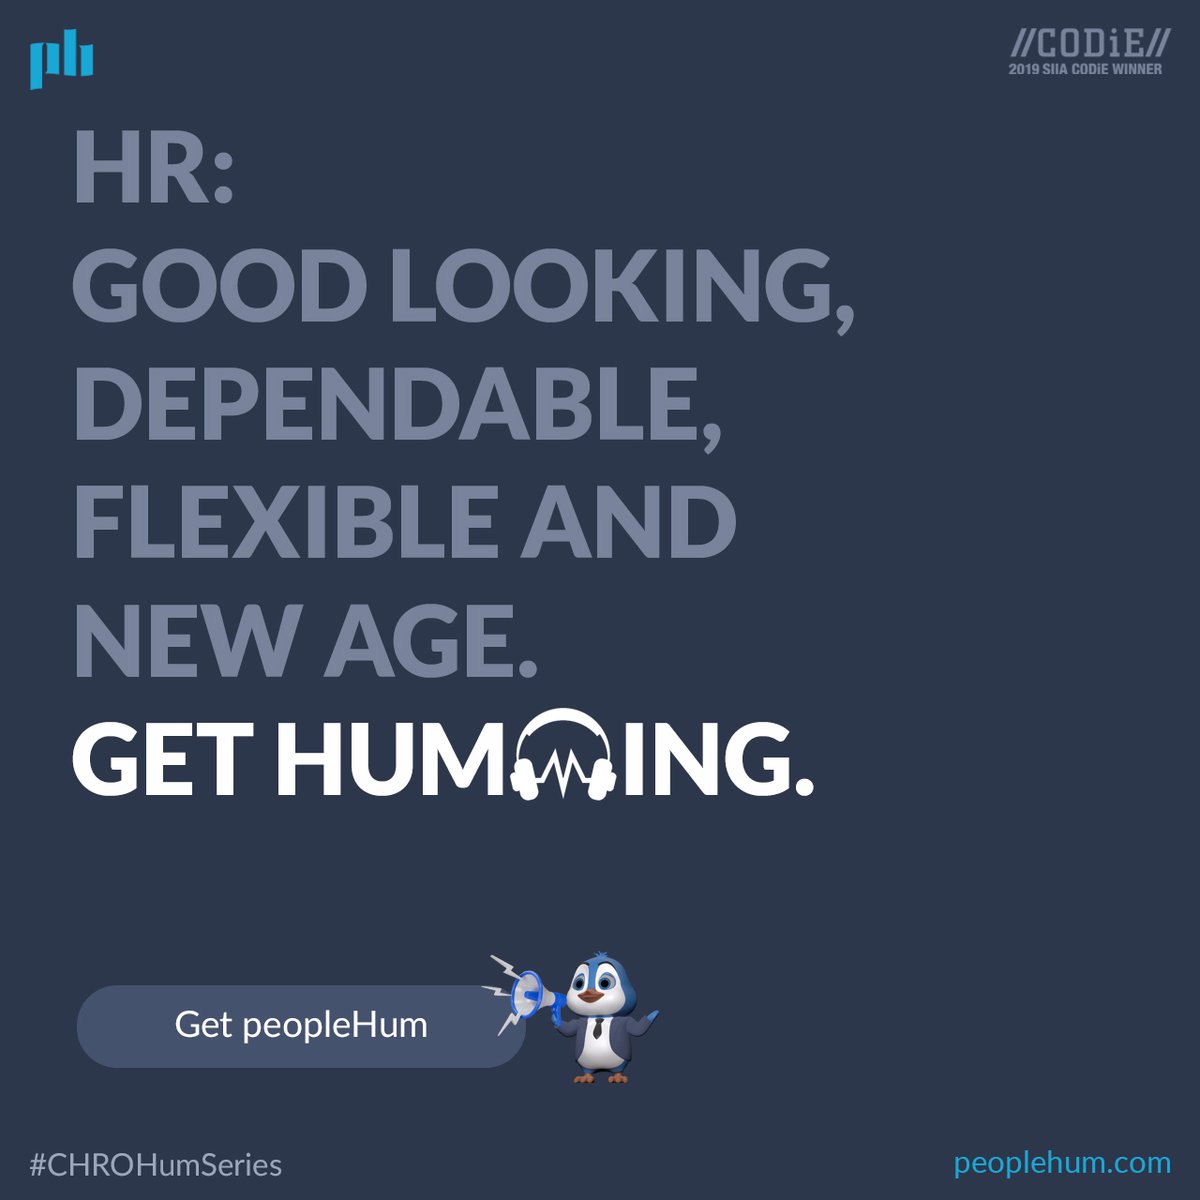 Ready for a smoother HR experience?
Schedule a demo today: s.peoplehum.com/ep0f7

#hr #hrcommunity #management #tech #techcommunity #workplaceinnovation #productivity #artificialintelligence #ai #business #usa #washington #newyork #losangeles #Chicago